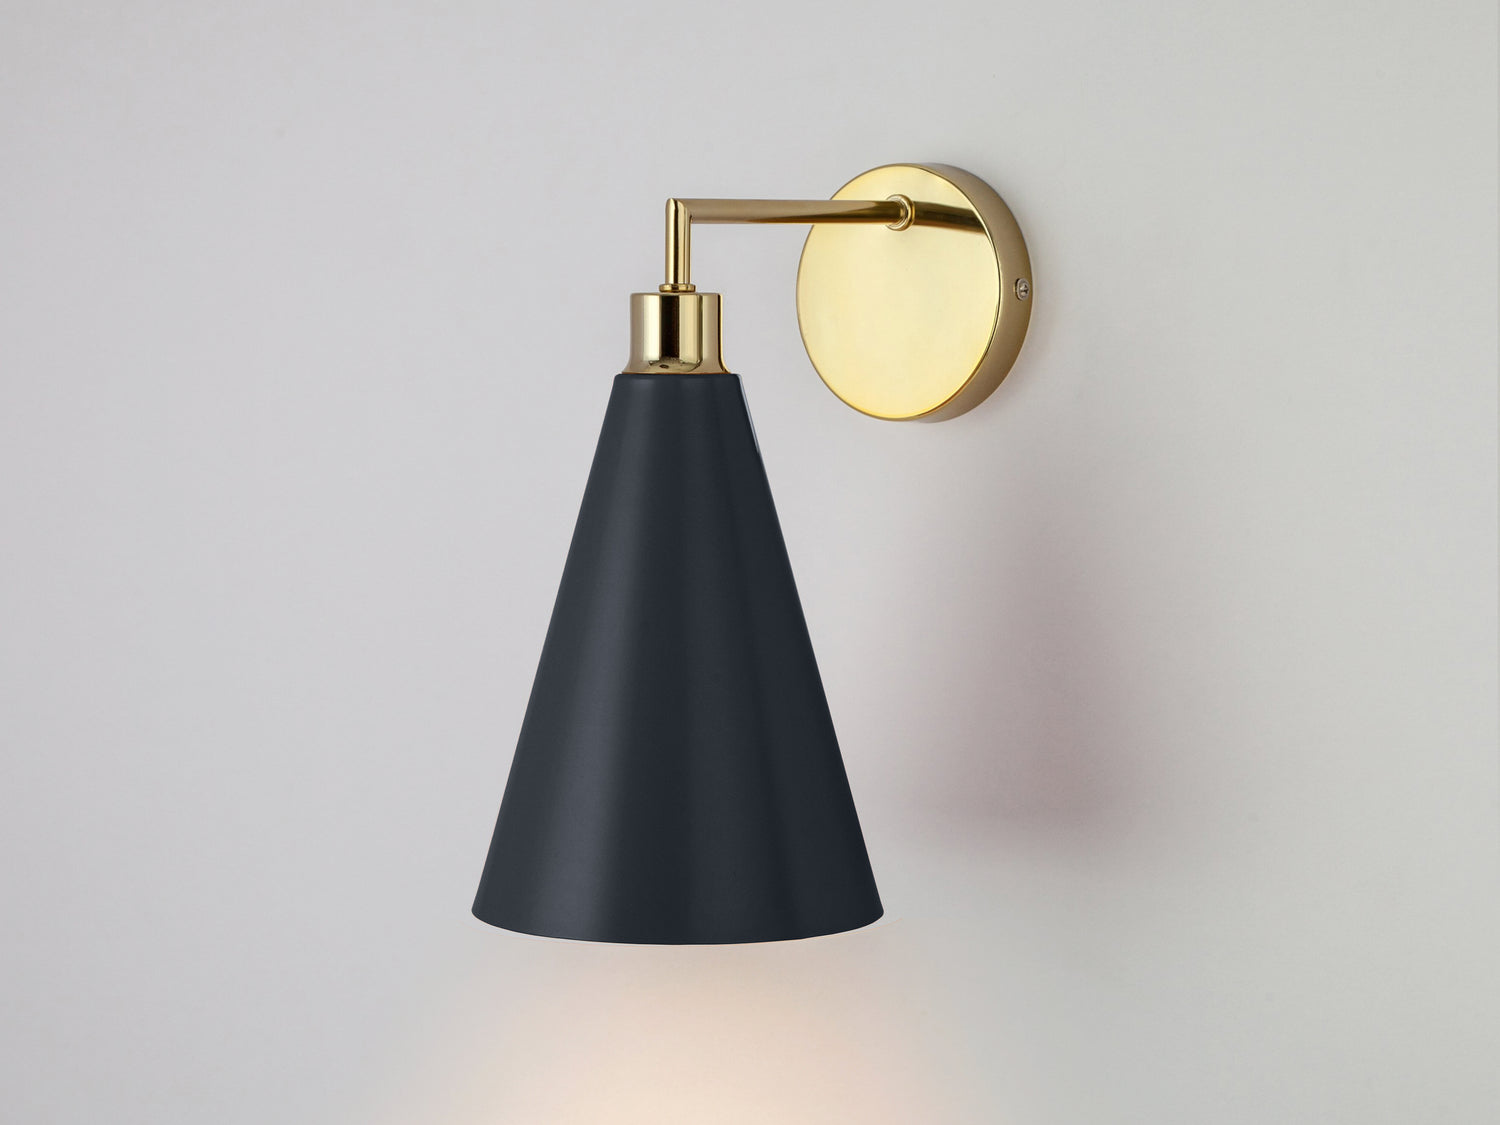 A brass wall fixture suspends a charcoal cone-shaped metal shade.